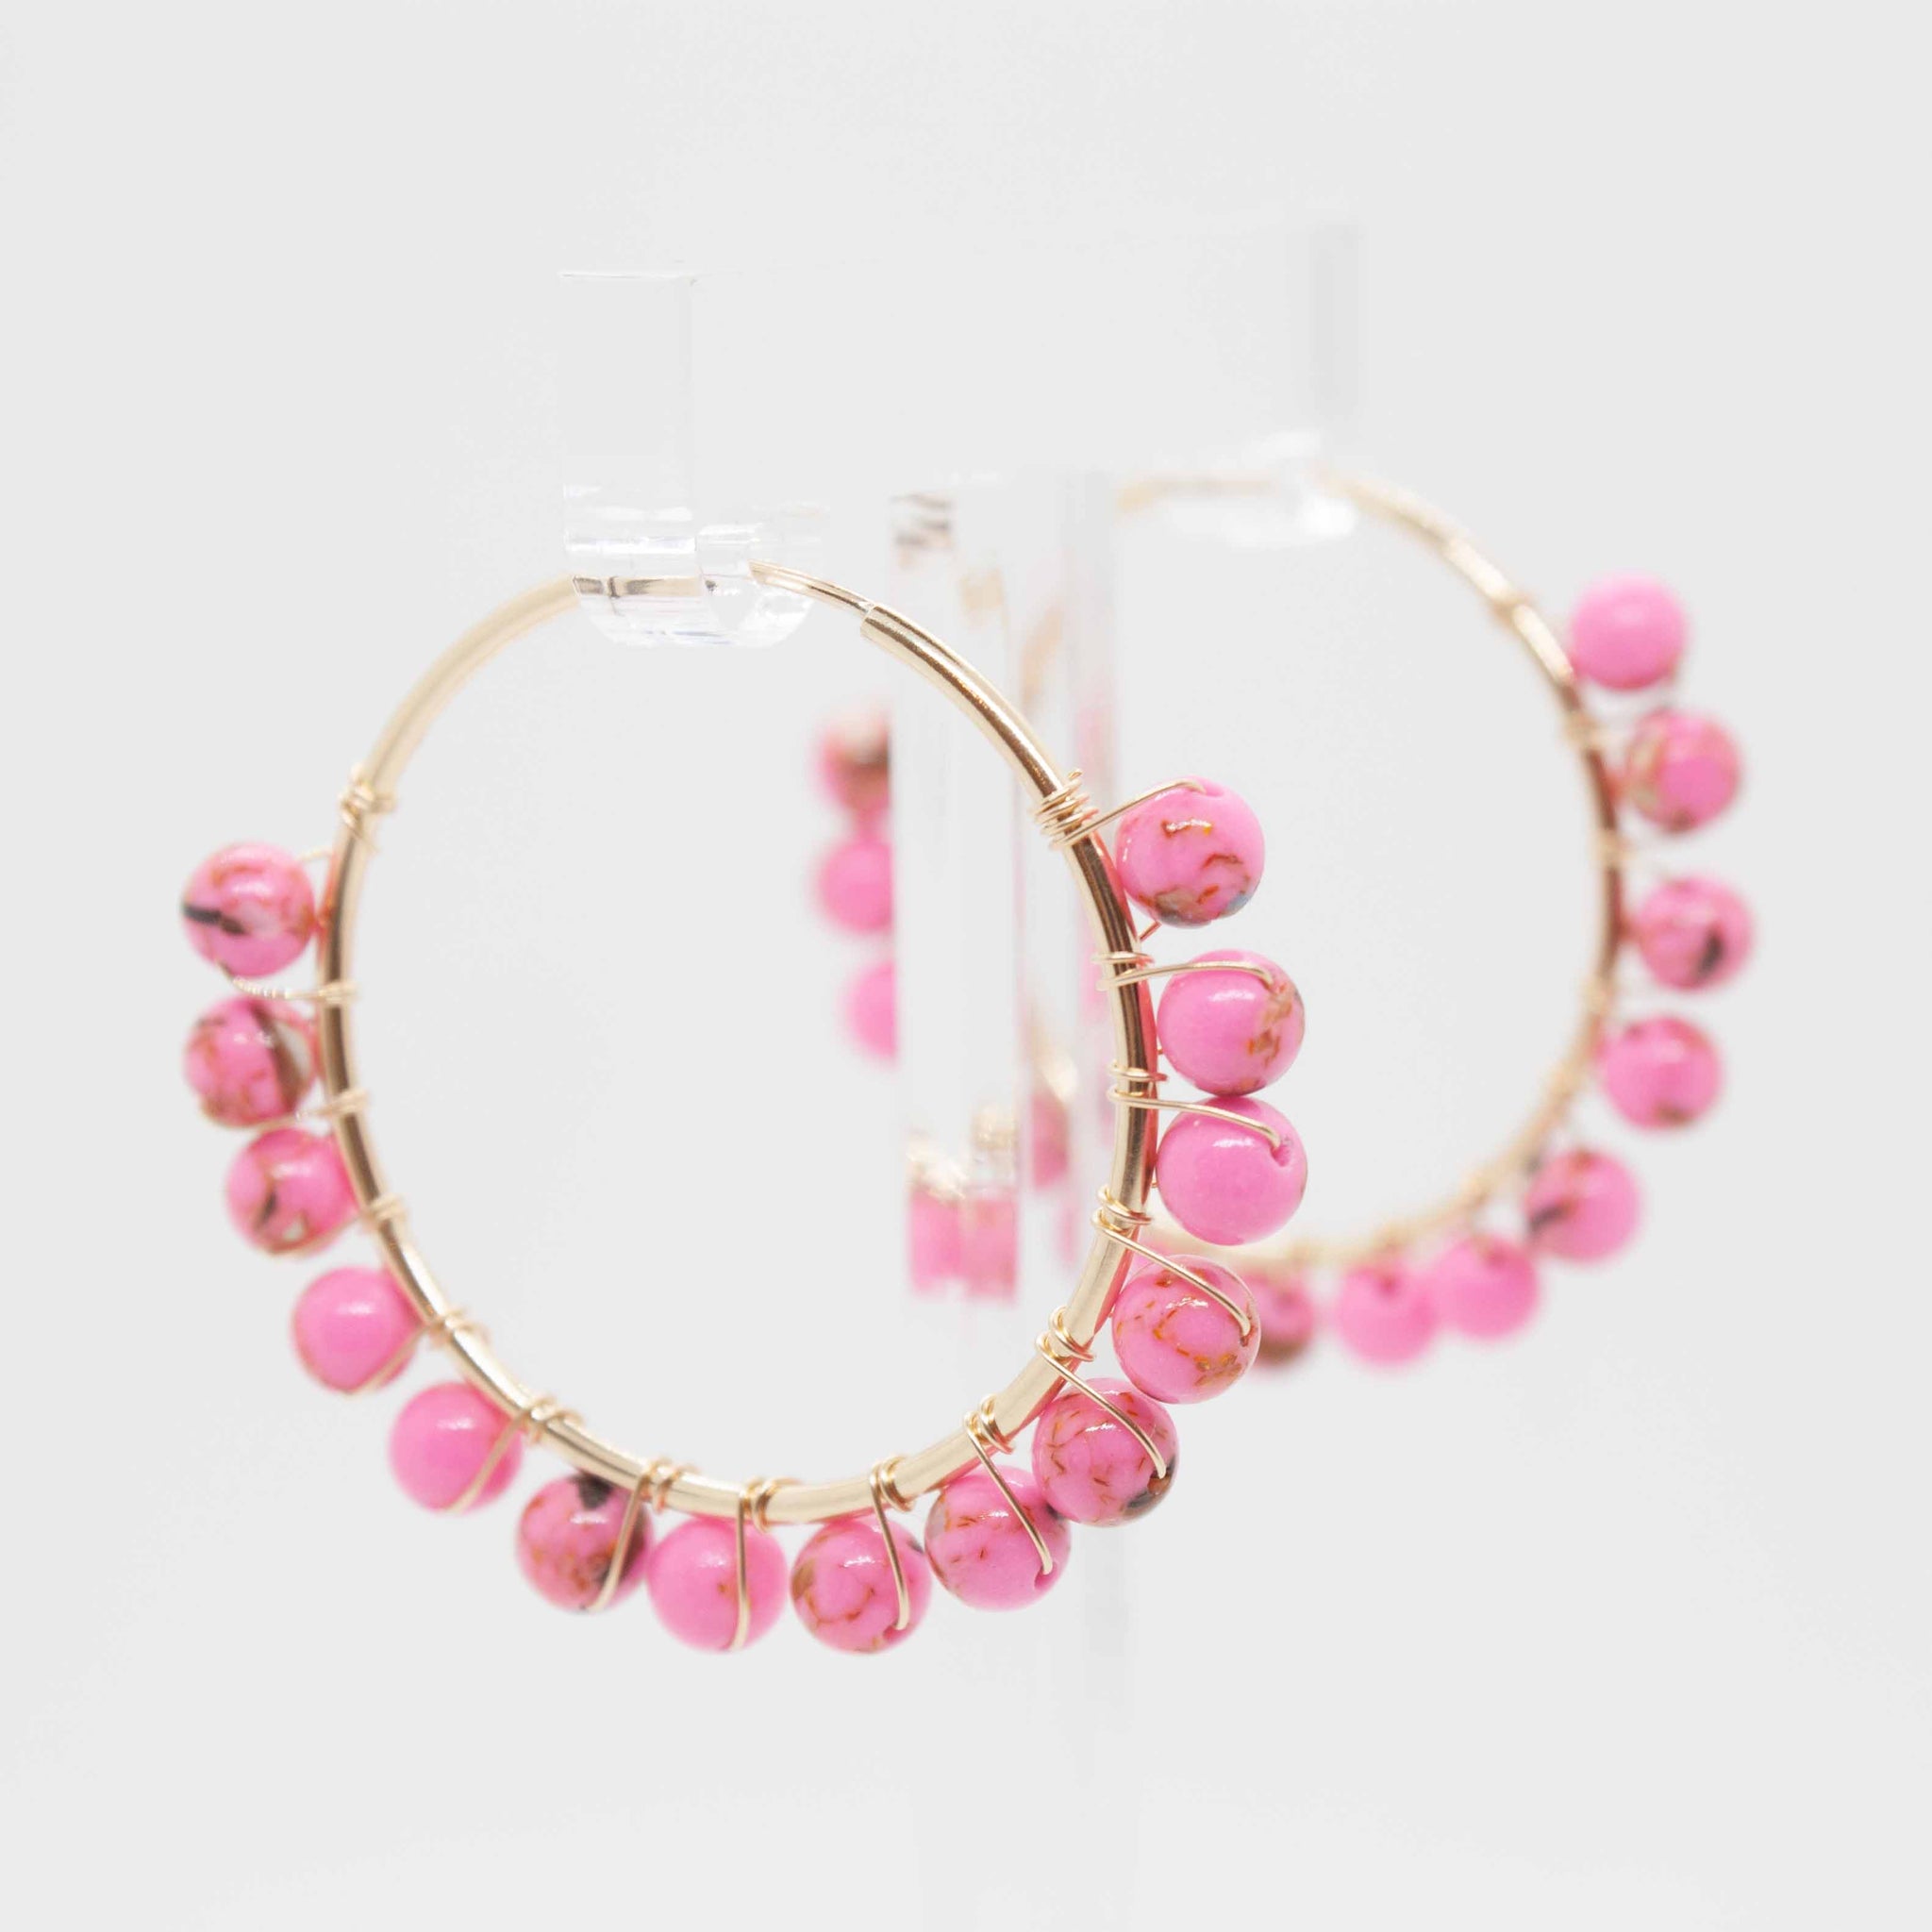 Cute and bubbly hoops to adorn your sweet lobes this summer!  30mm gold filled hoop earrings and pink beads wrapped with gold wire. Handmade in Toronto by kp jewelry co.